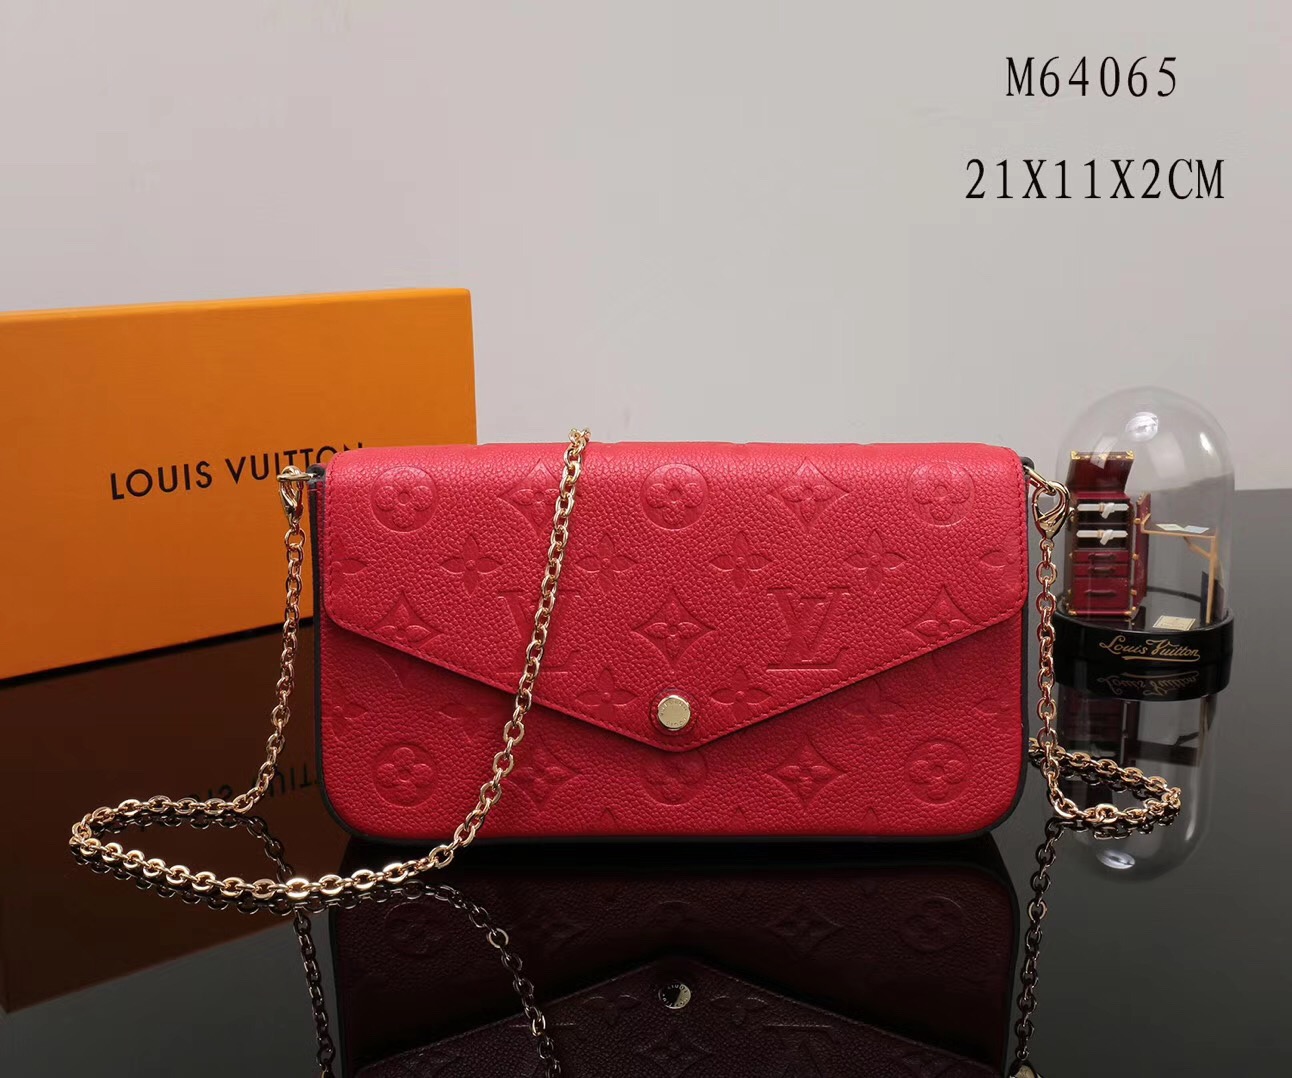 LV Louis Vuitton M64065 Pochette Felicie Leather bags Real Handbags Red